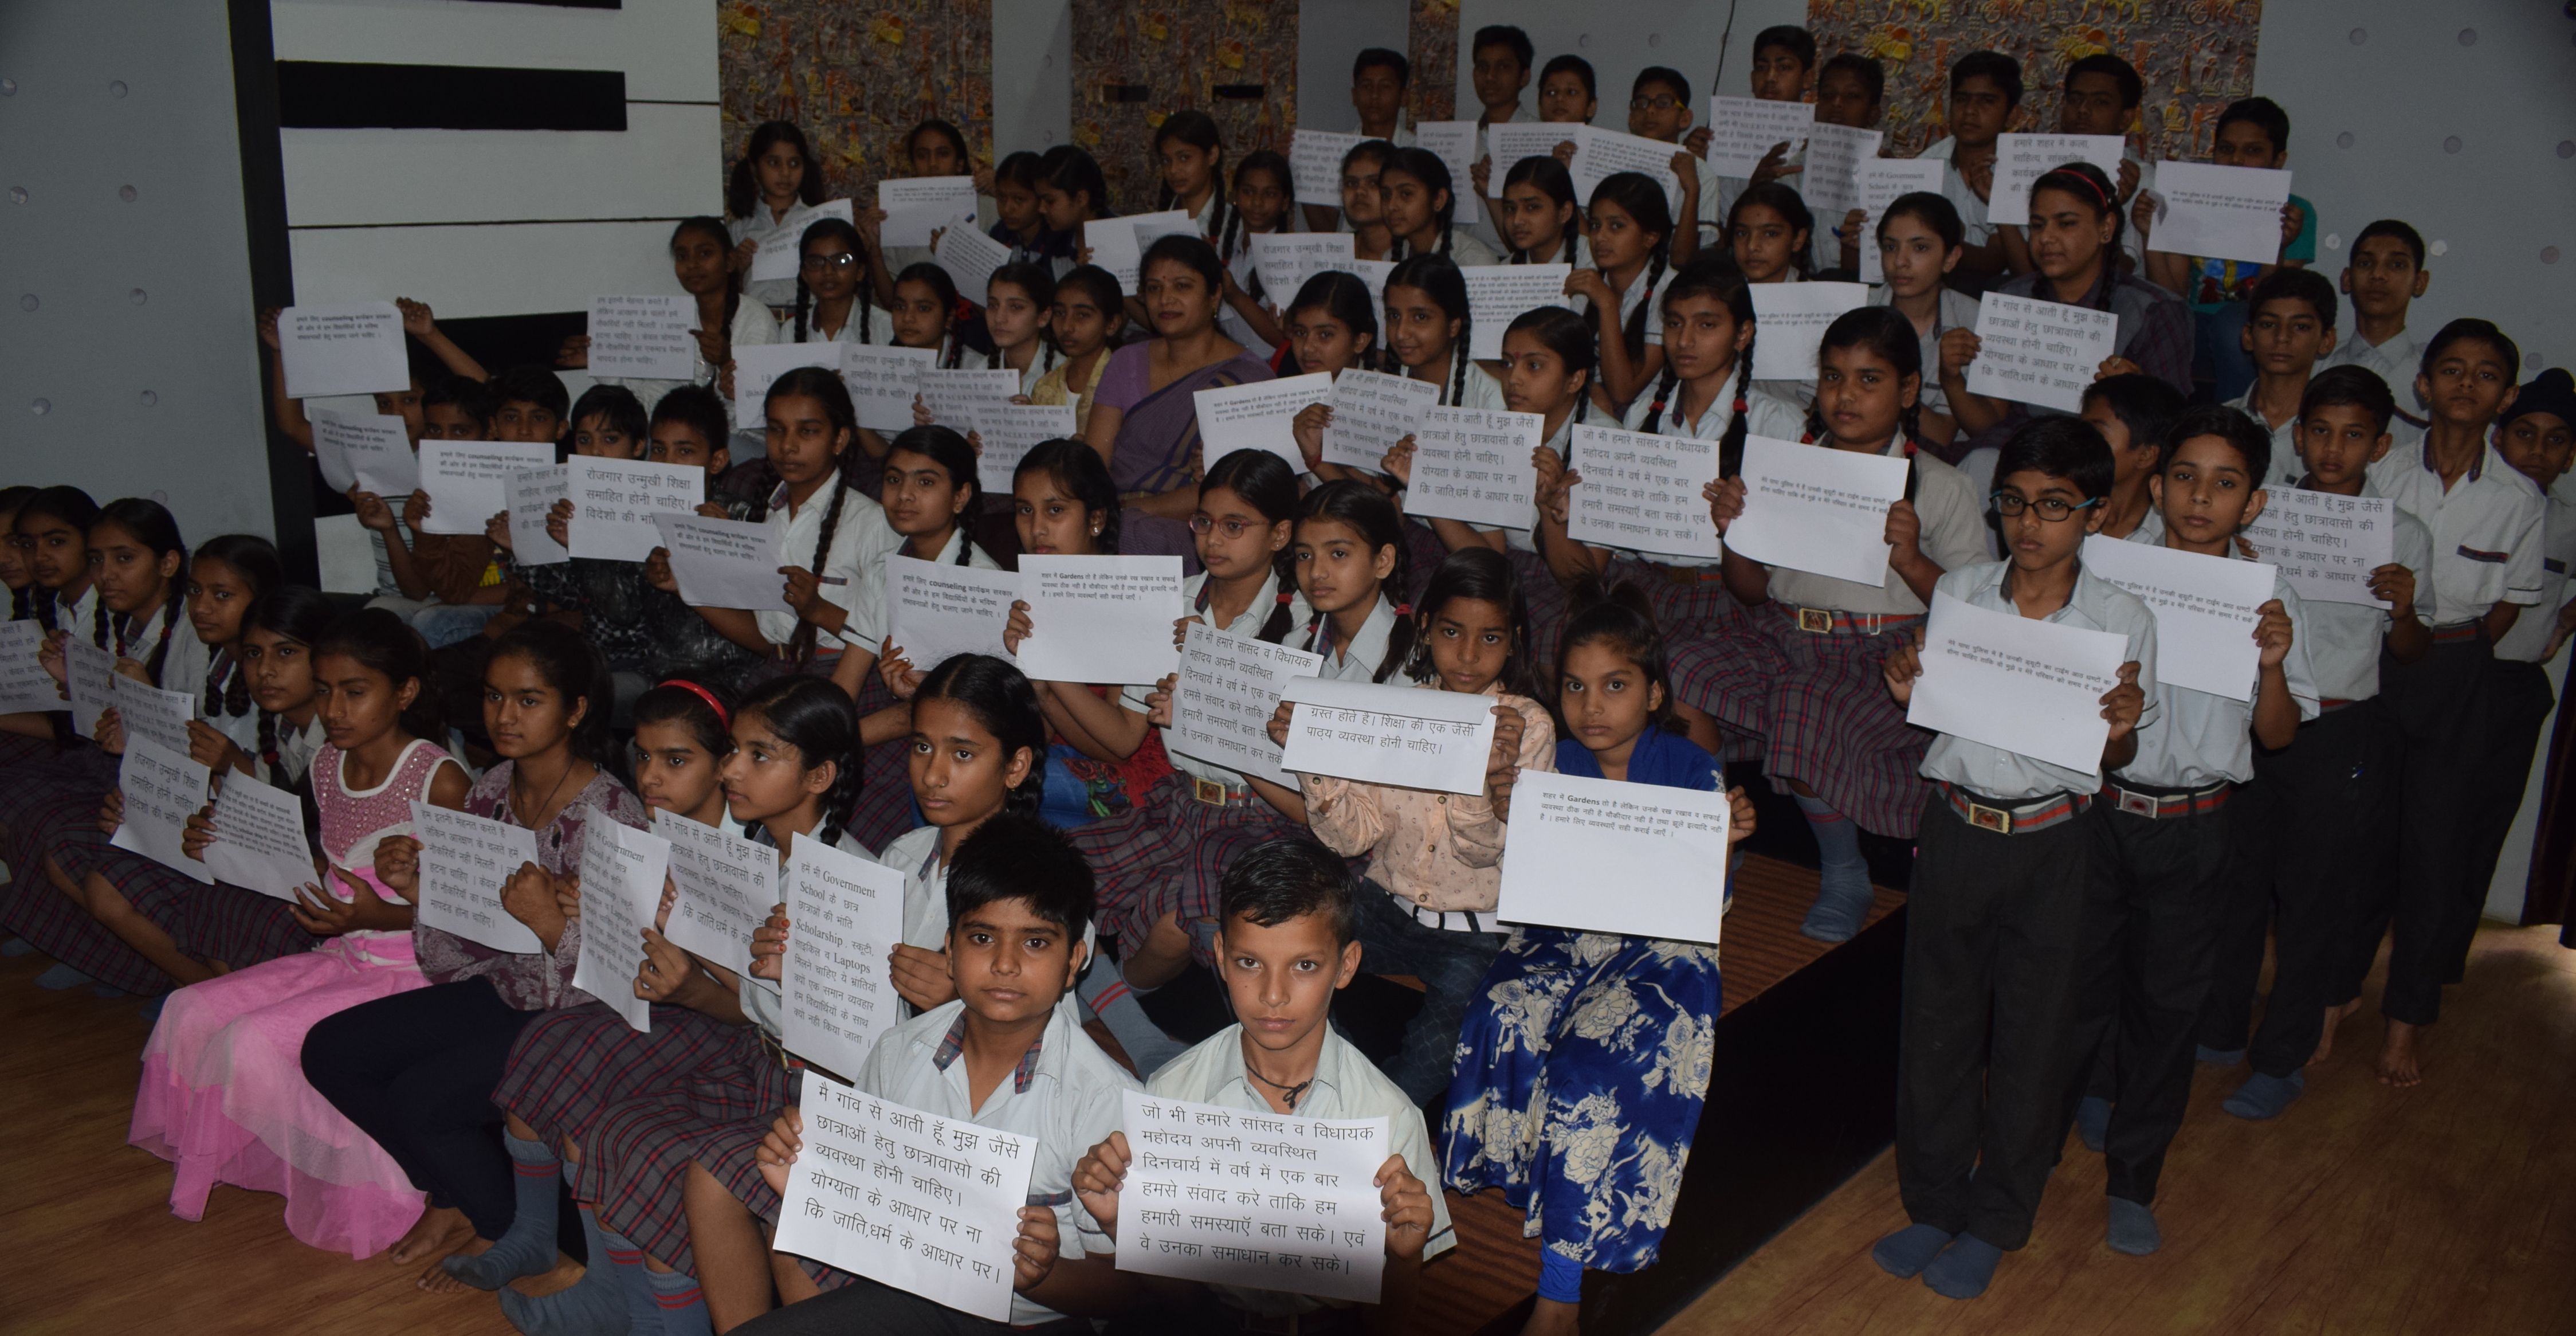 Alwar Children Want Their Issues Be Raised In Parliament